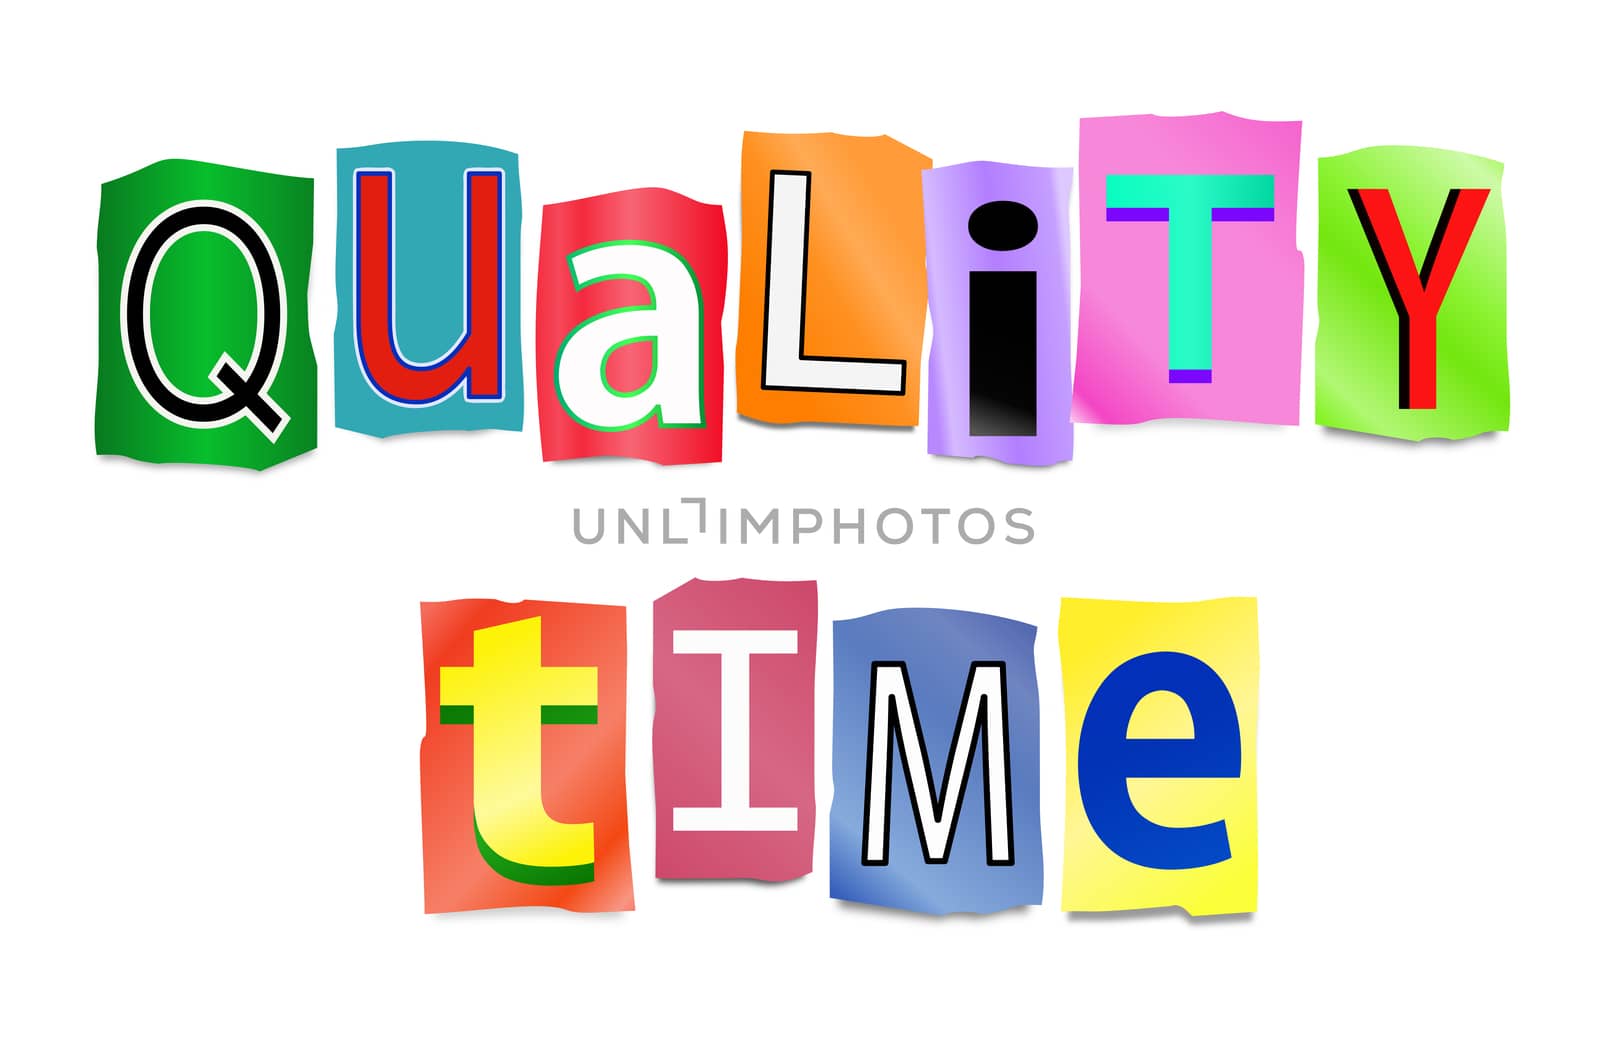 Illustration depicting a set of cut out printed letters arranged to form the words quality time.